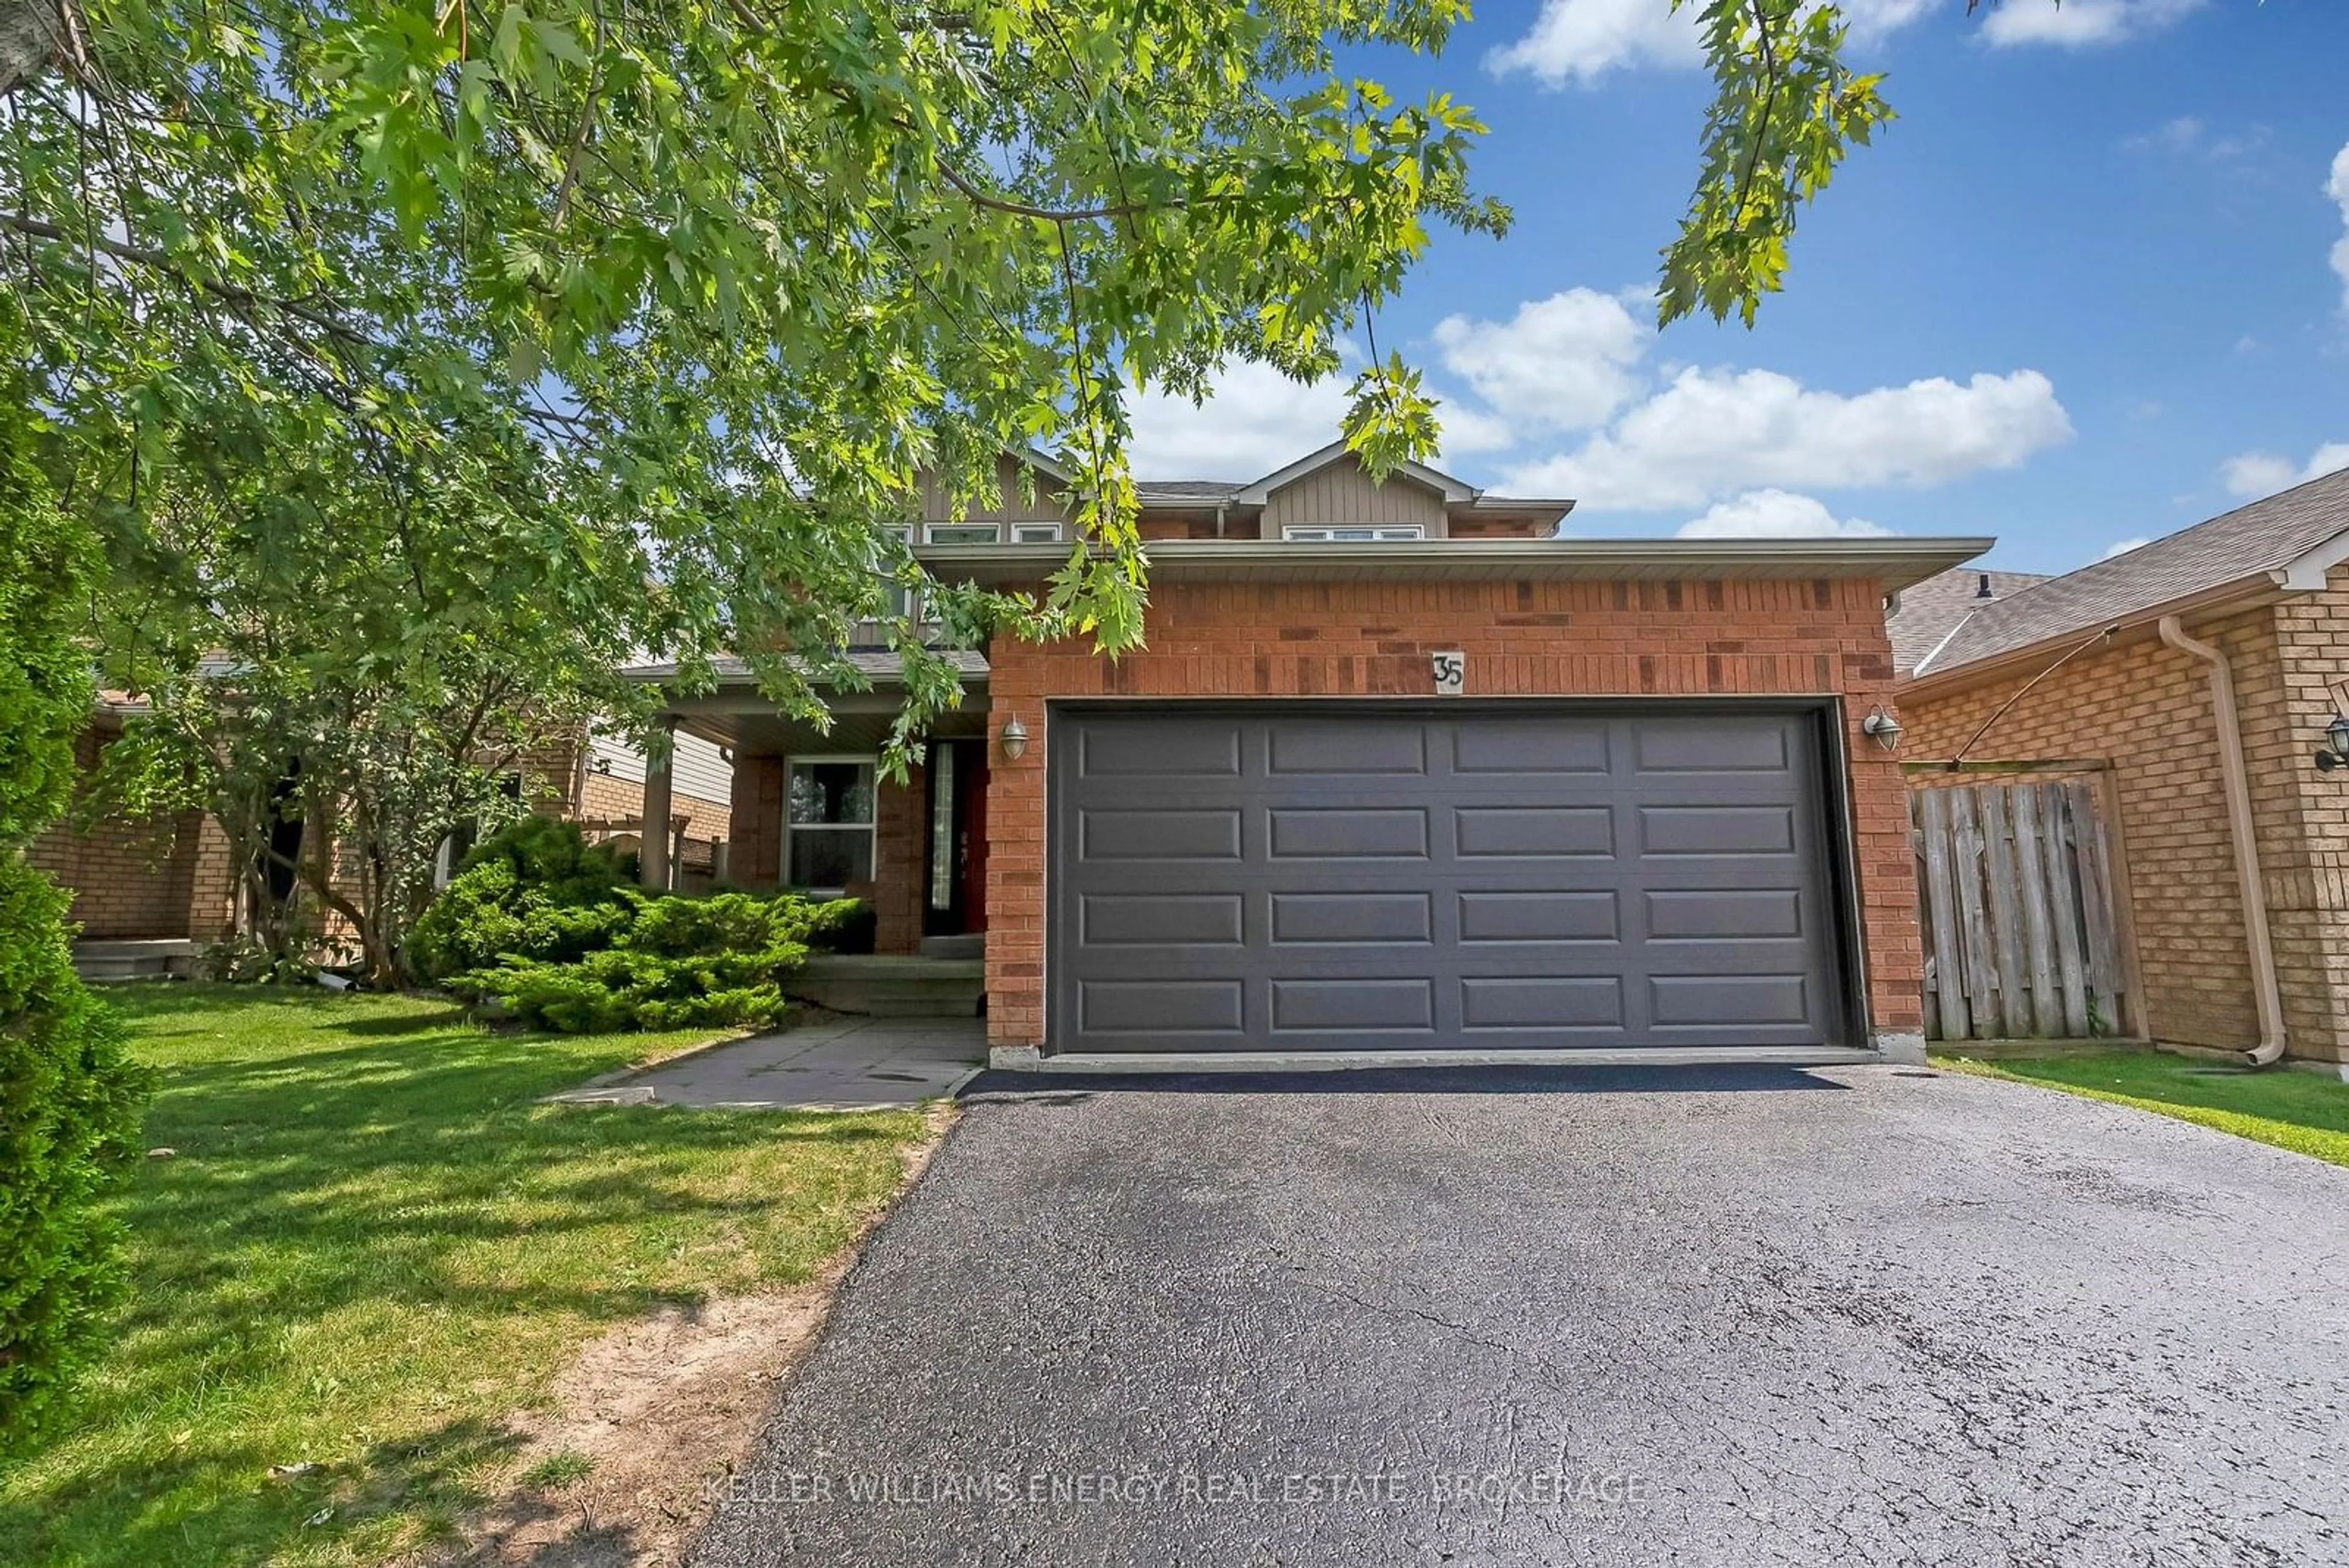 Home with brick exterior material for 35 Goodwin Ave, Clarington Ontario L1C 4Z5